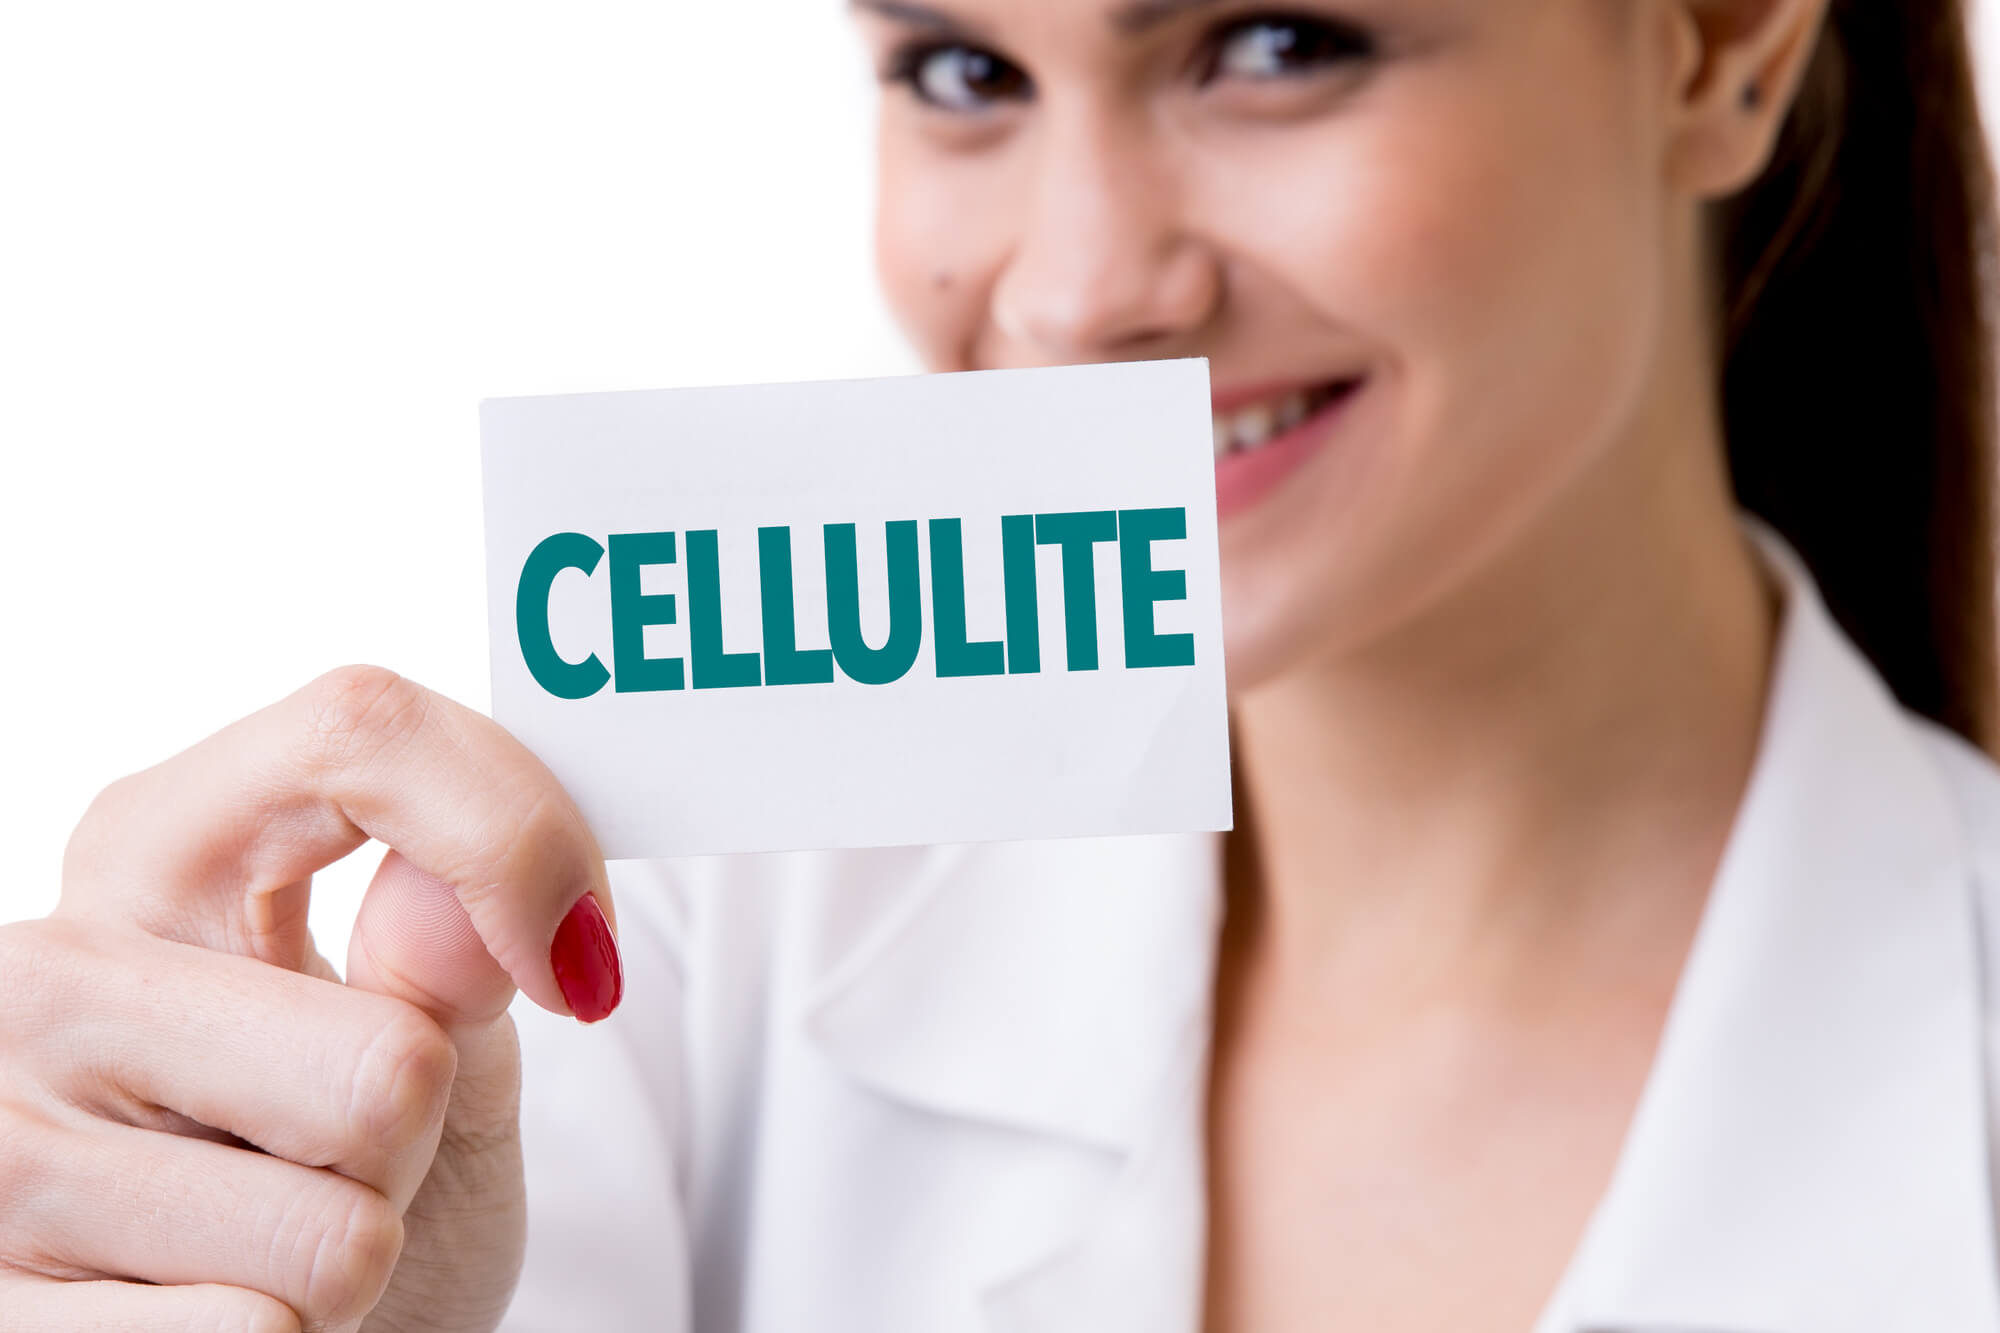 Does cellulite get worse with age?